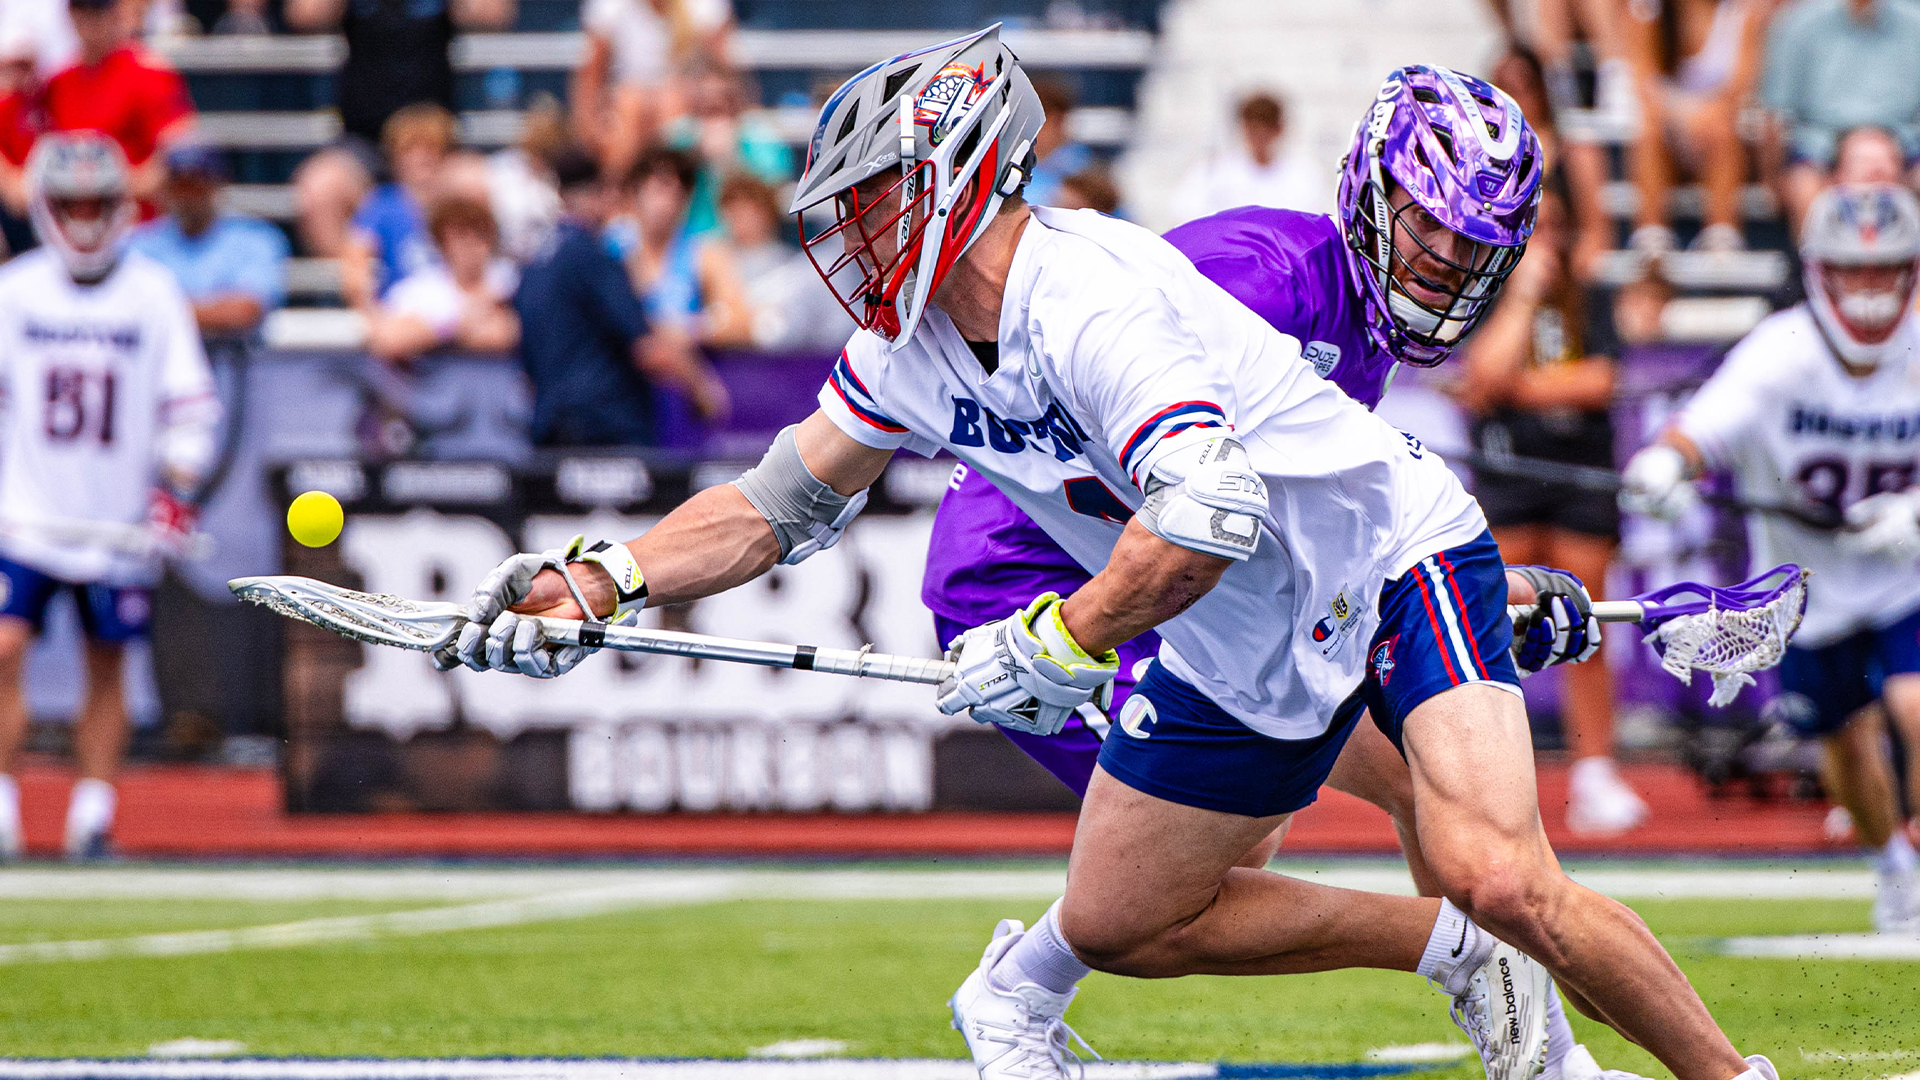 Zac Tucci is the ideal example of the PLL's new style of faceoff athlete.